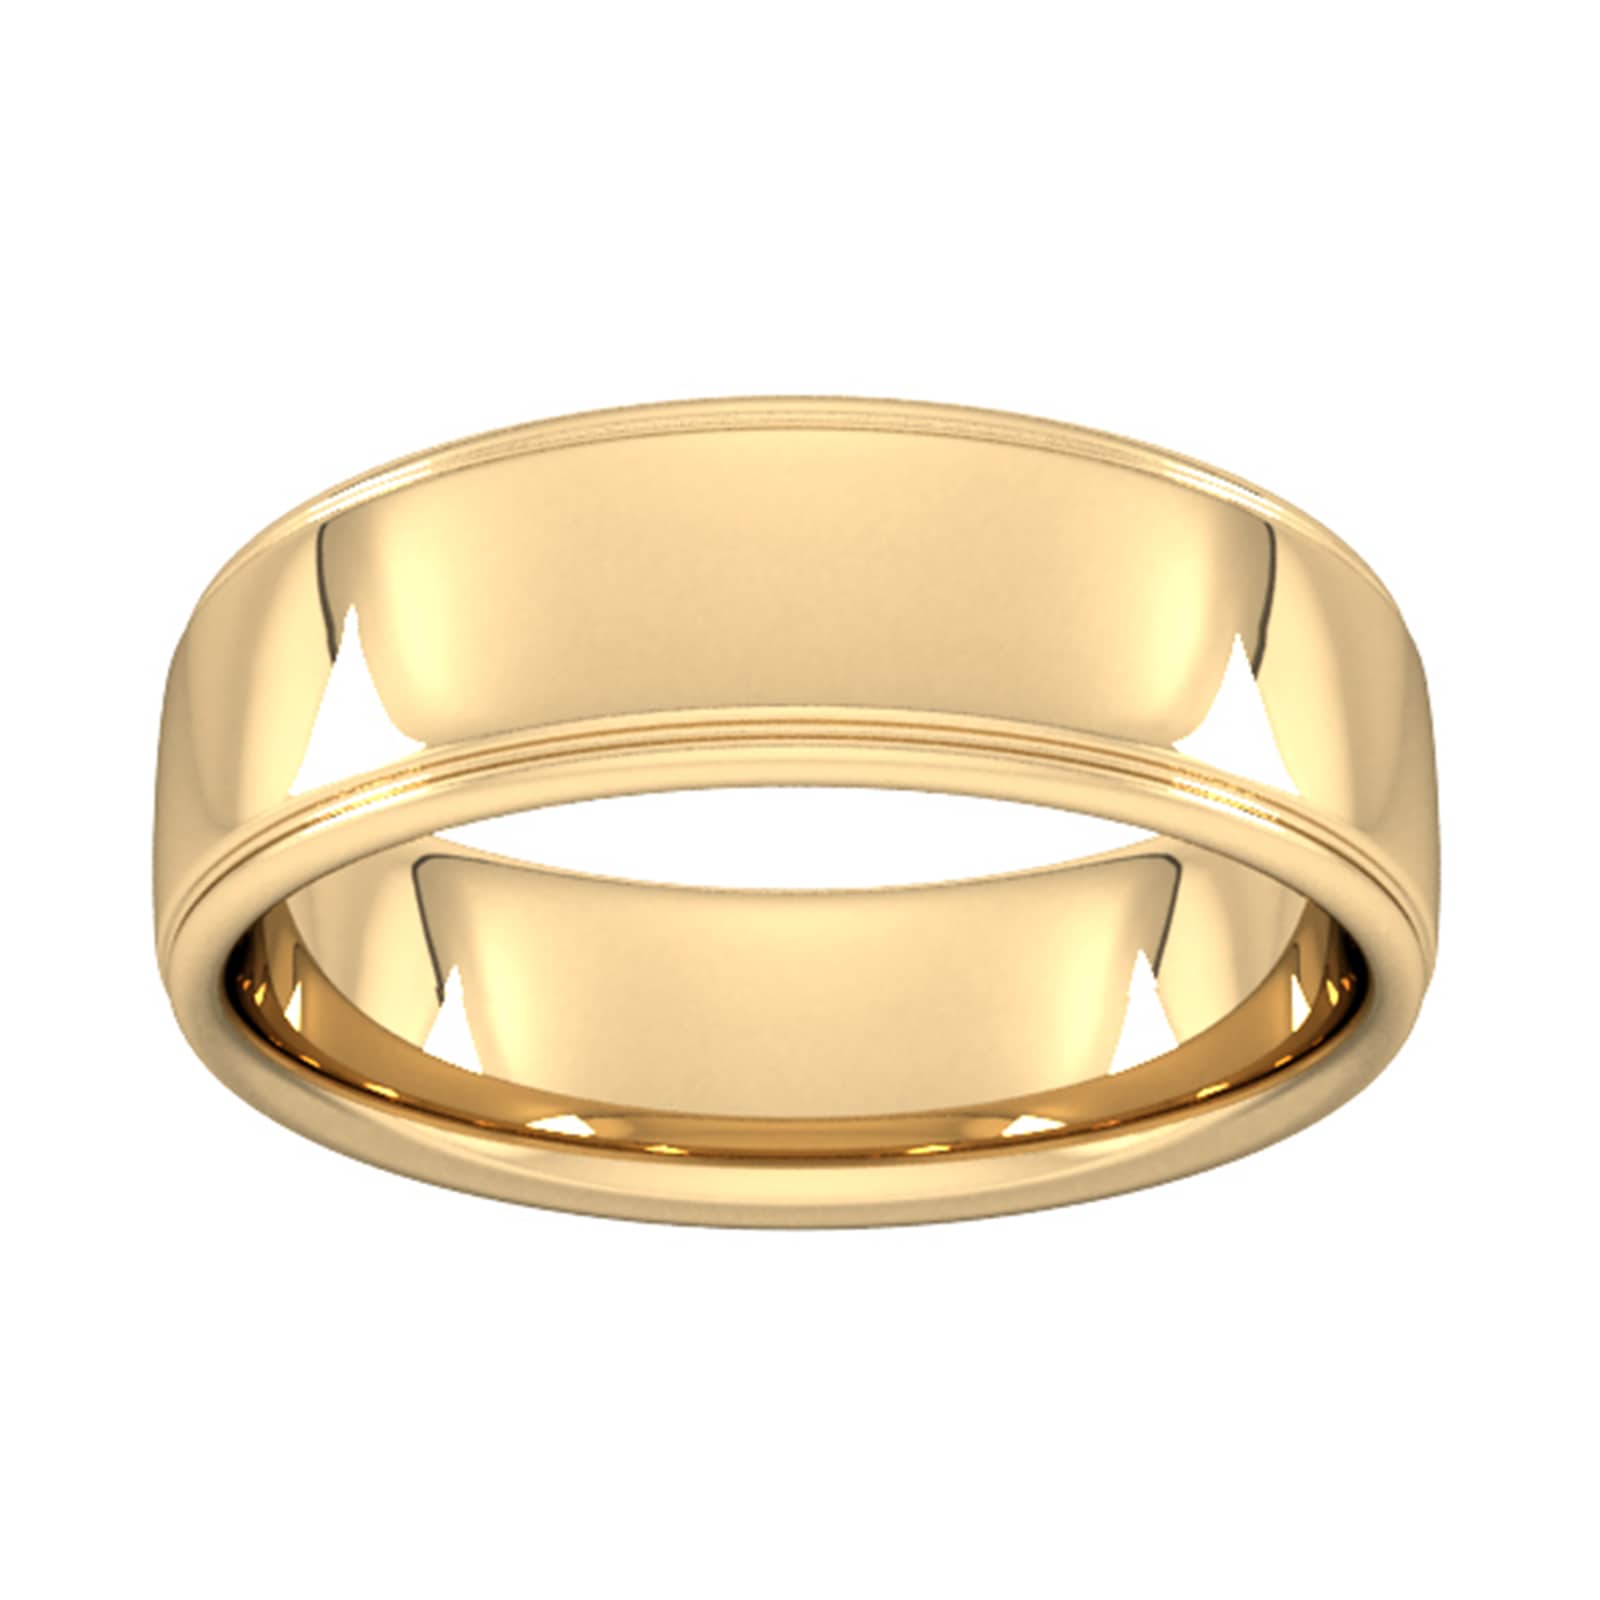 7mm Slight Court Standard Polished Finish With Grooves Wedding Ring In 9 Carat Yellow Gold - Ring Size R